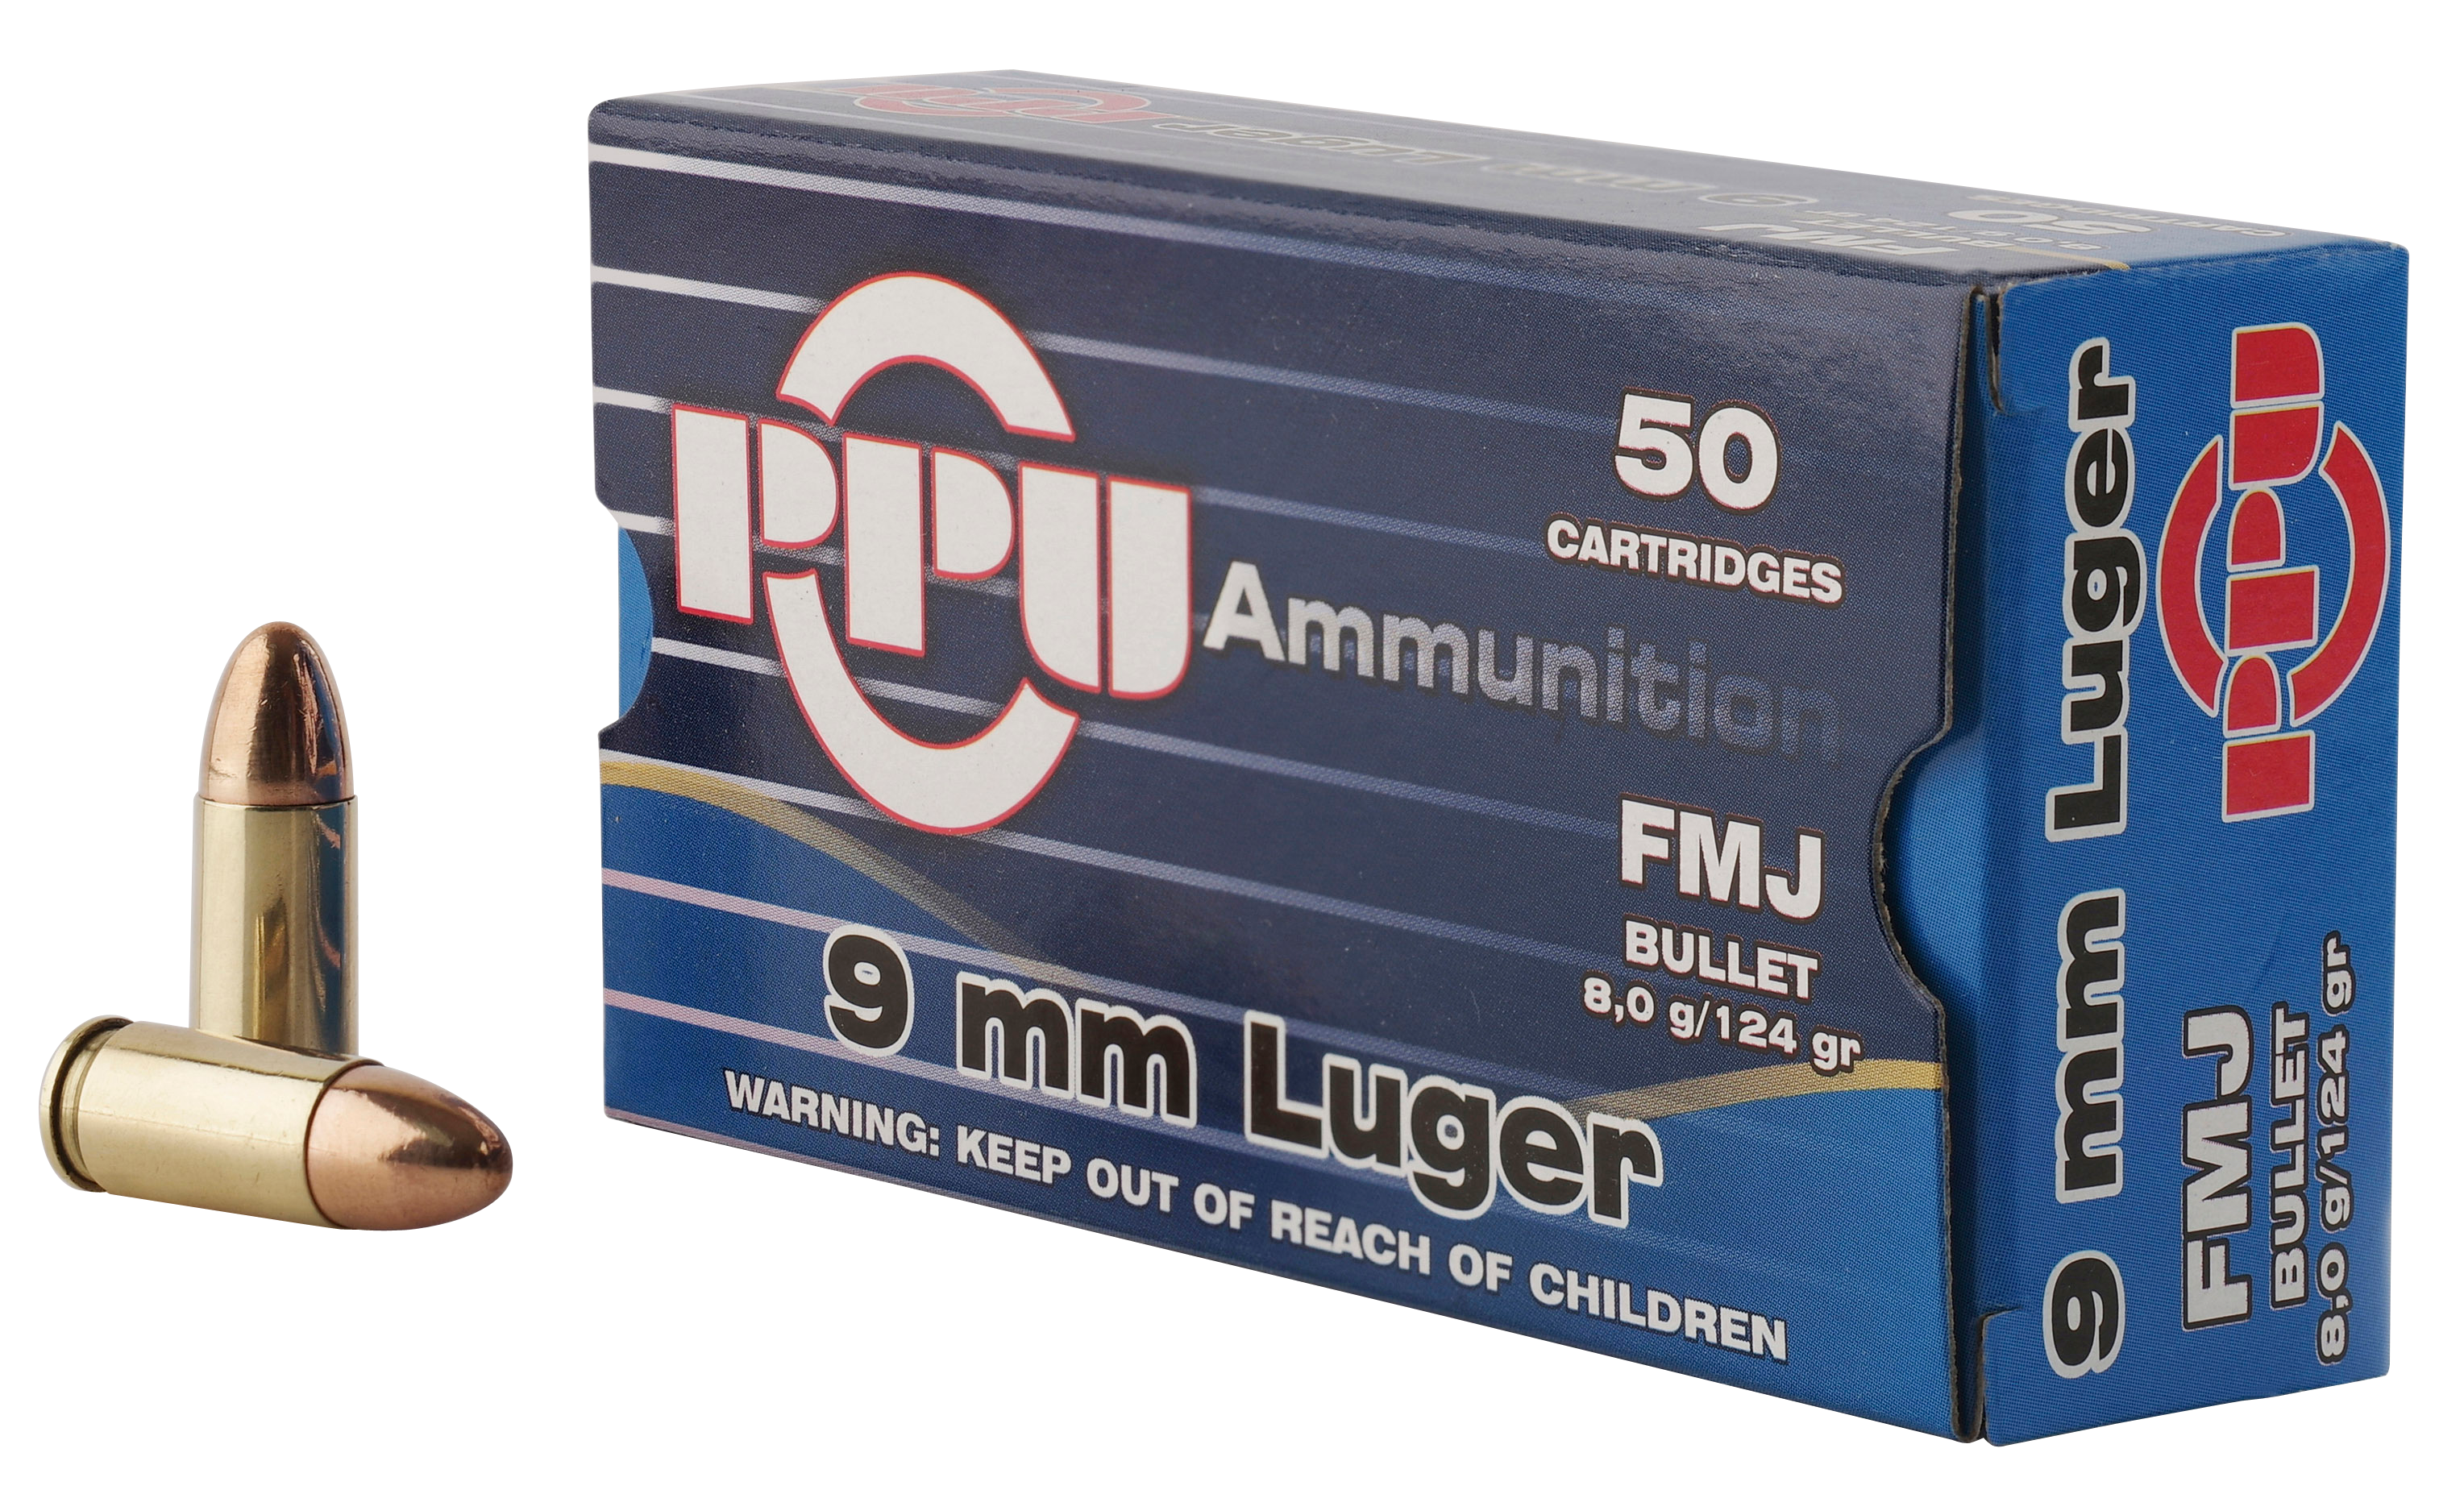 PPU Luger FMJ Ammo